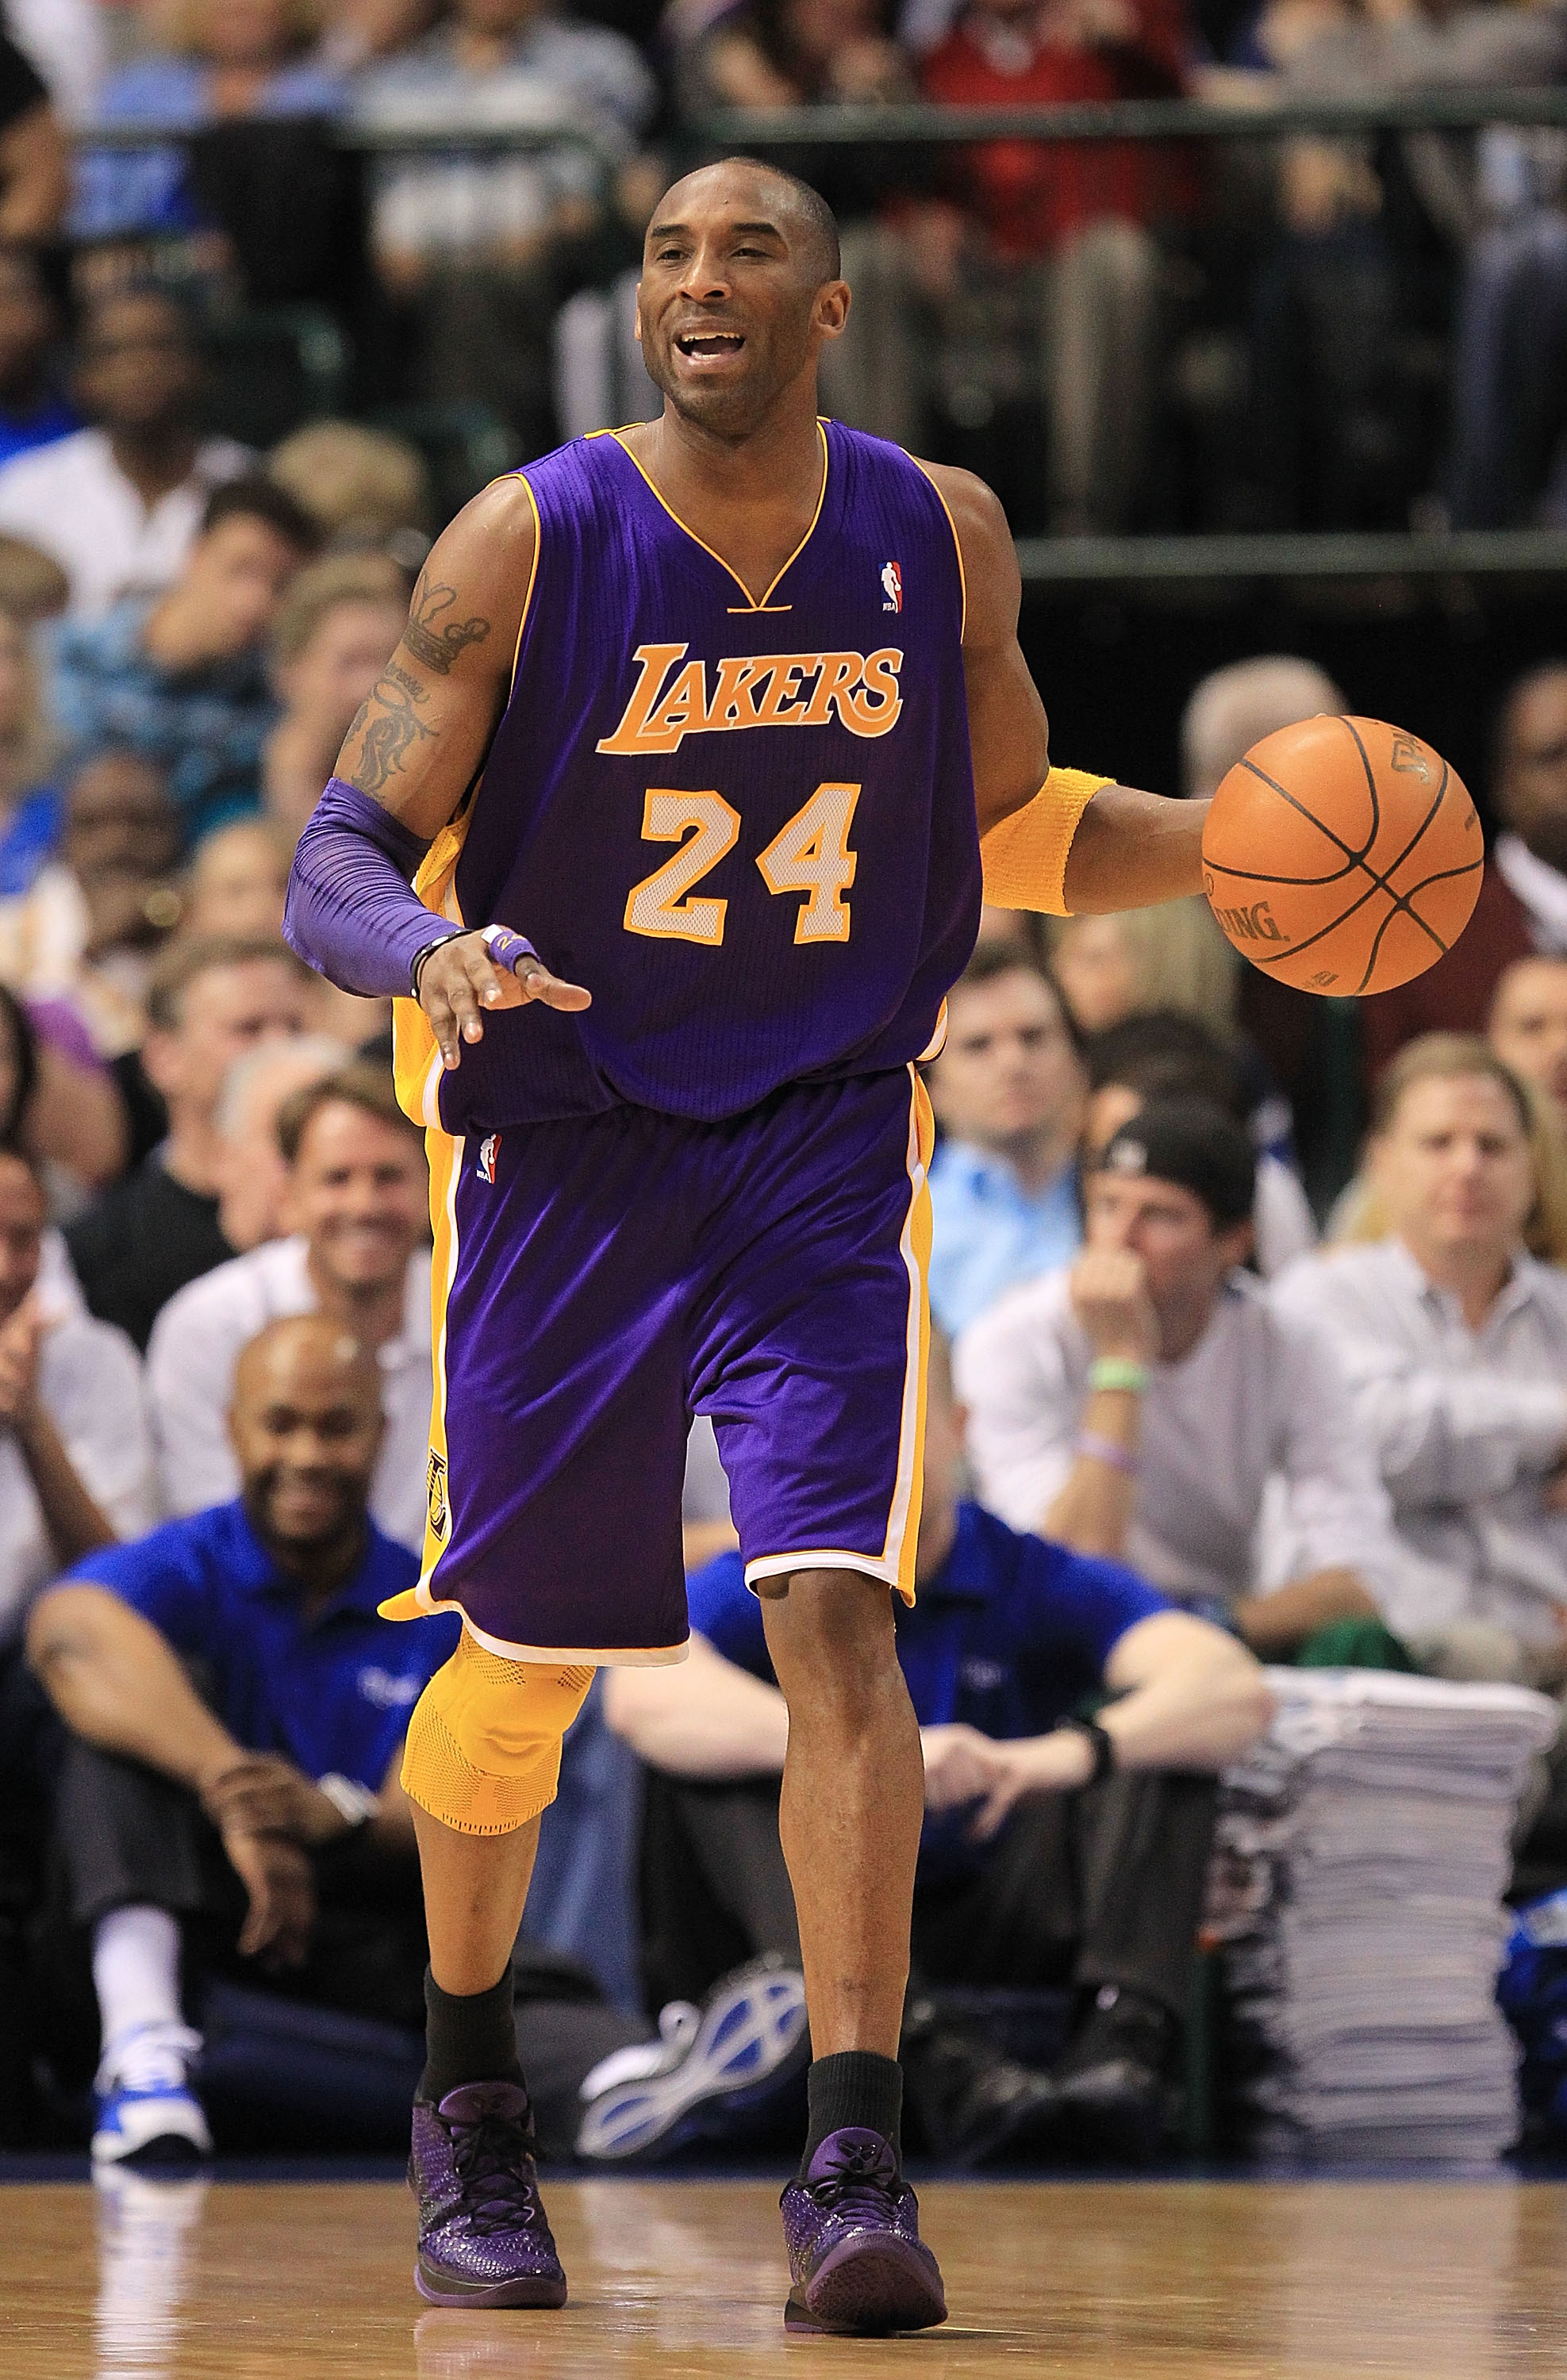 DALLAS, TX - MARCH 12:  Guard Kobe Bryant #24 of the Los Angeles Lakers at American Airlines Center on March 12, 2011 in Dallas, Texas.  NOTE TO USER: User expressly acknowledges and agrees that, by downloading and or using this photograph, User is consen